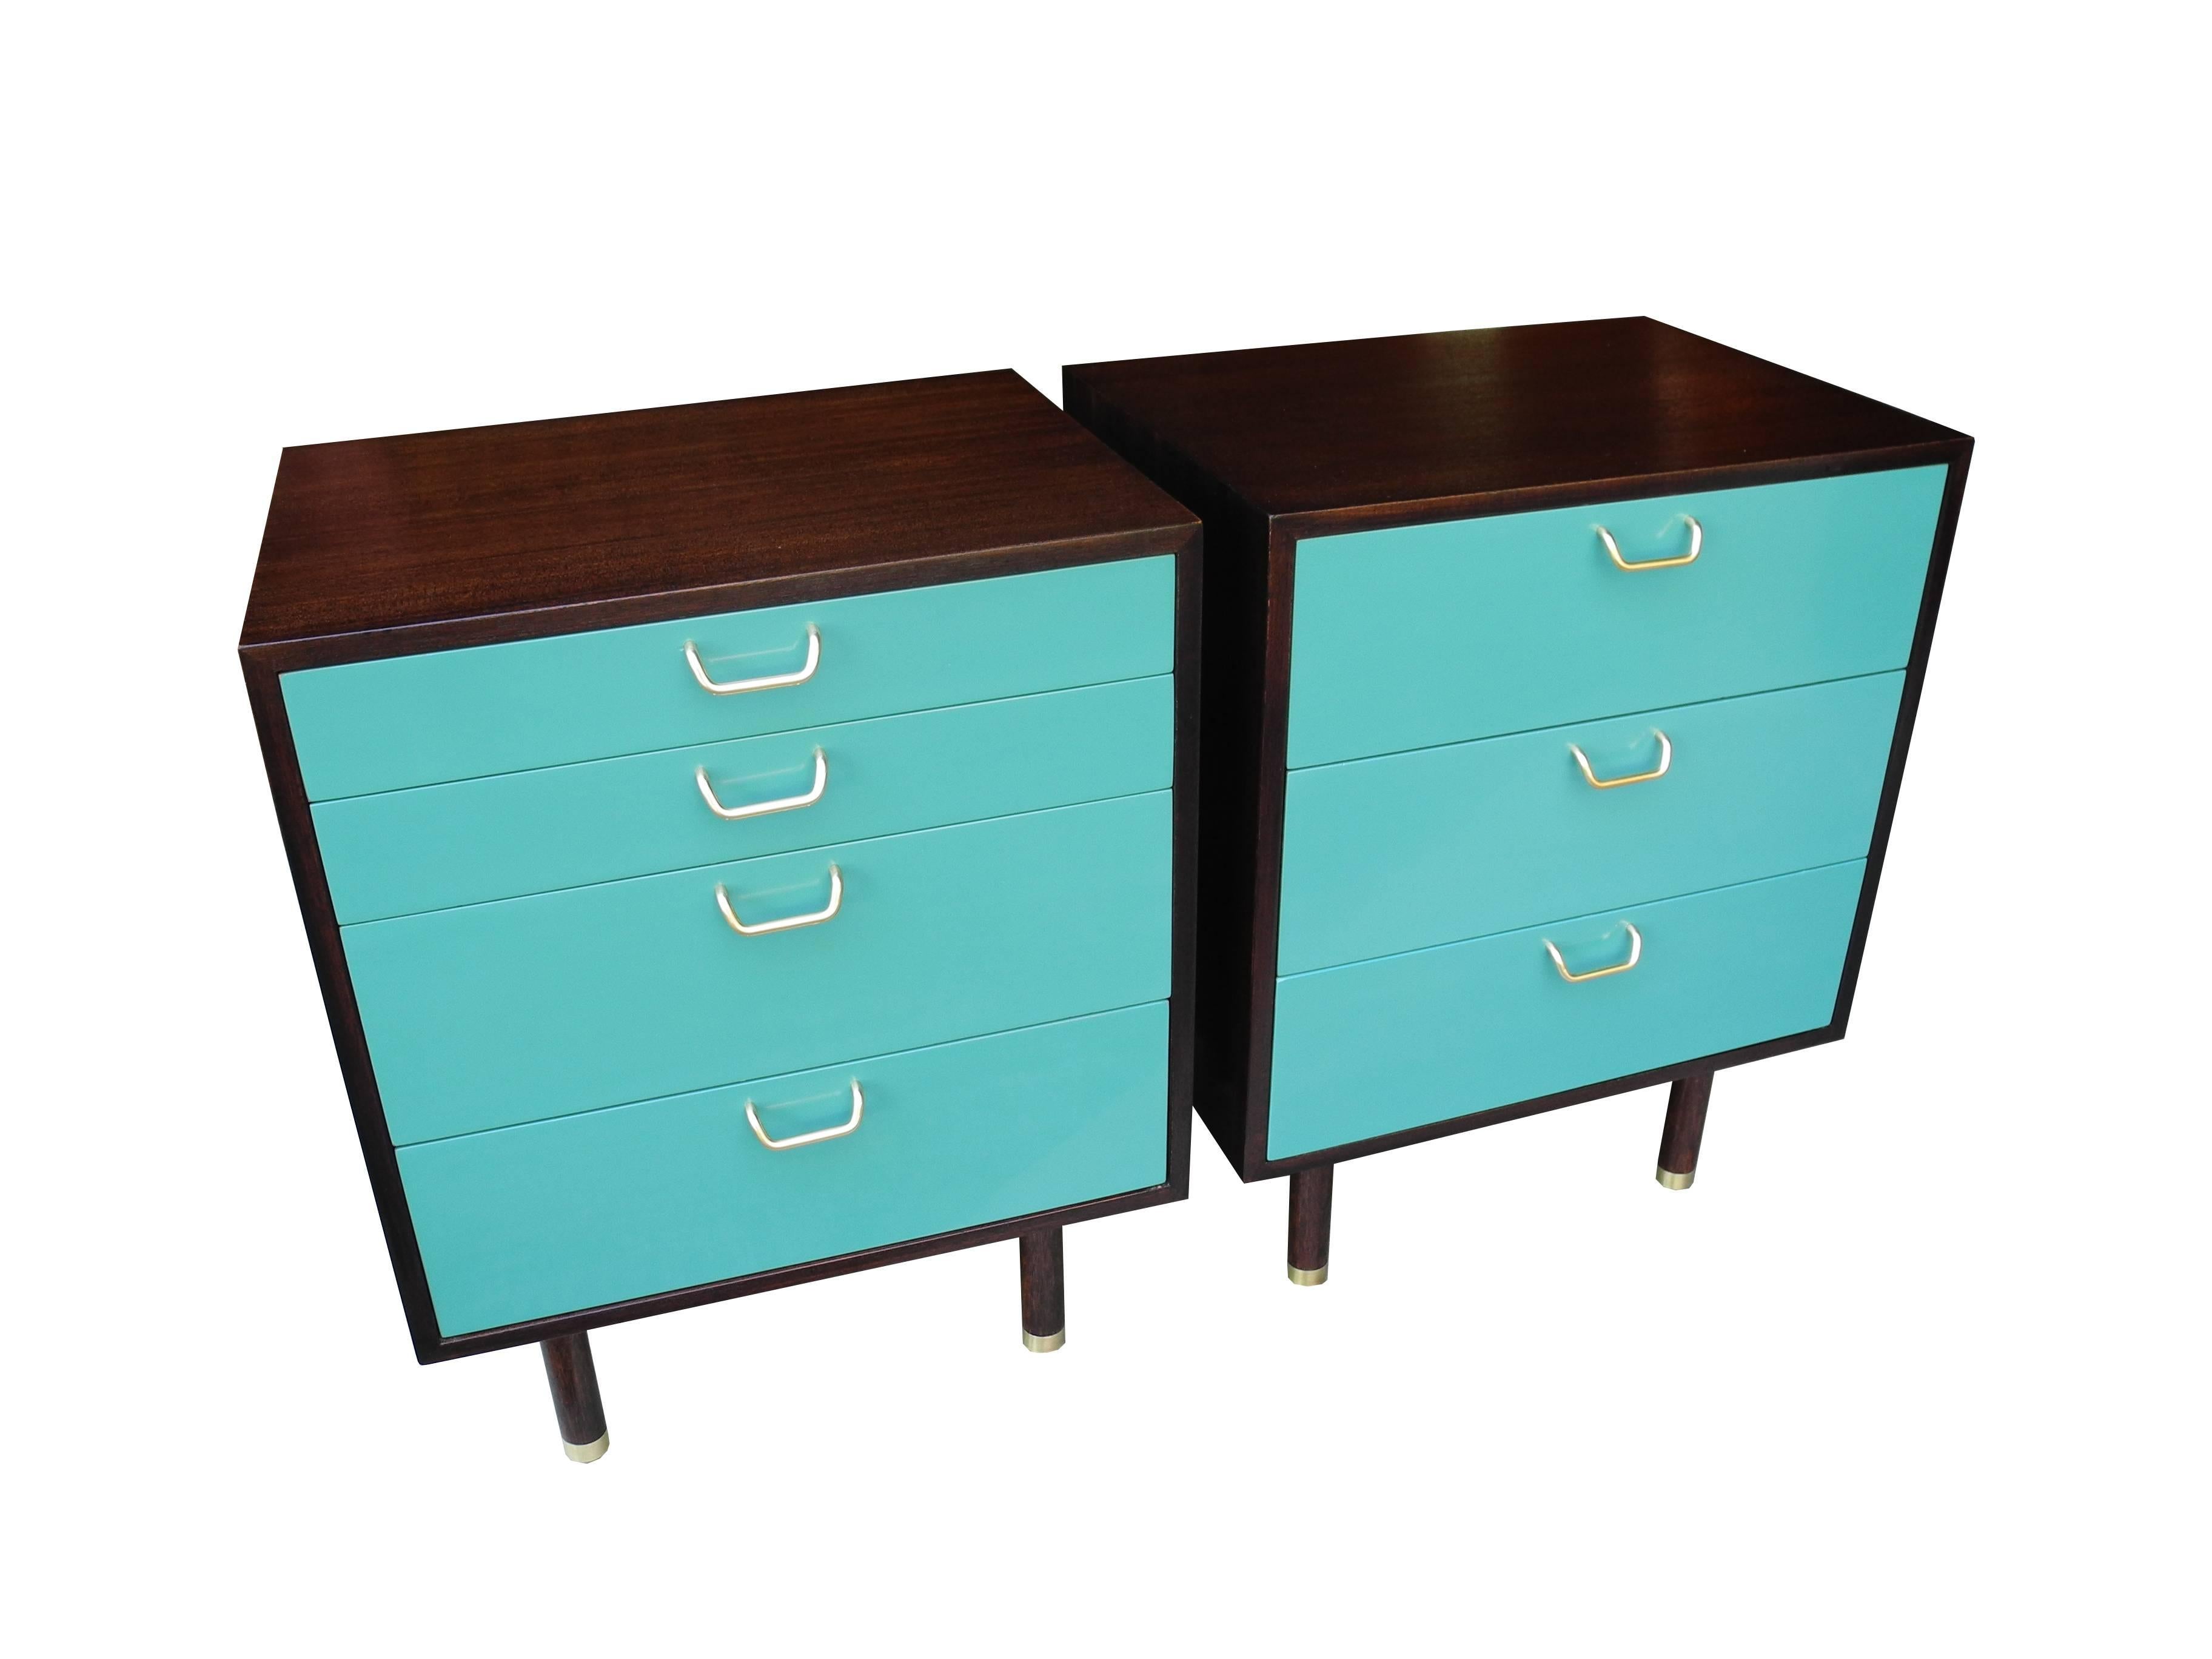 These Harvey Probber modern nightstands or small dressers are made of a mahogany case, one set with four painted and polished drawers the other set with three drawers. Completely restored in its original Probber color and polished finish. Equipped